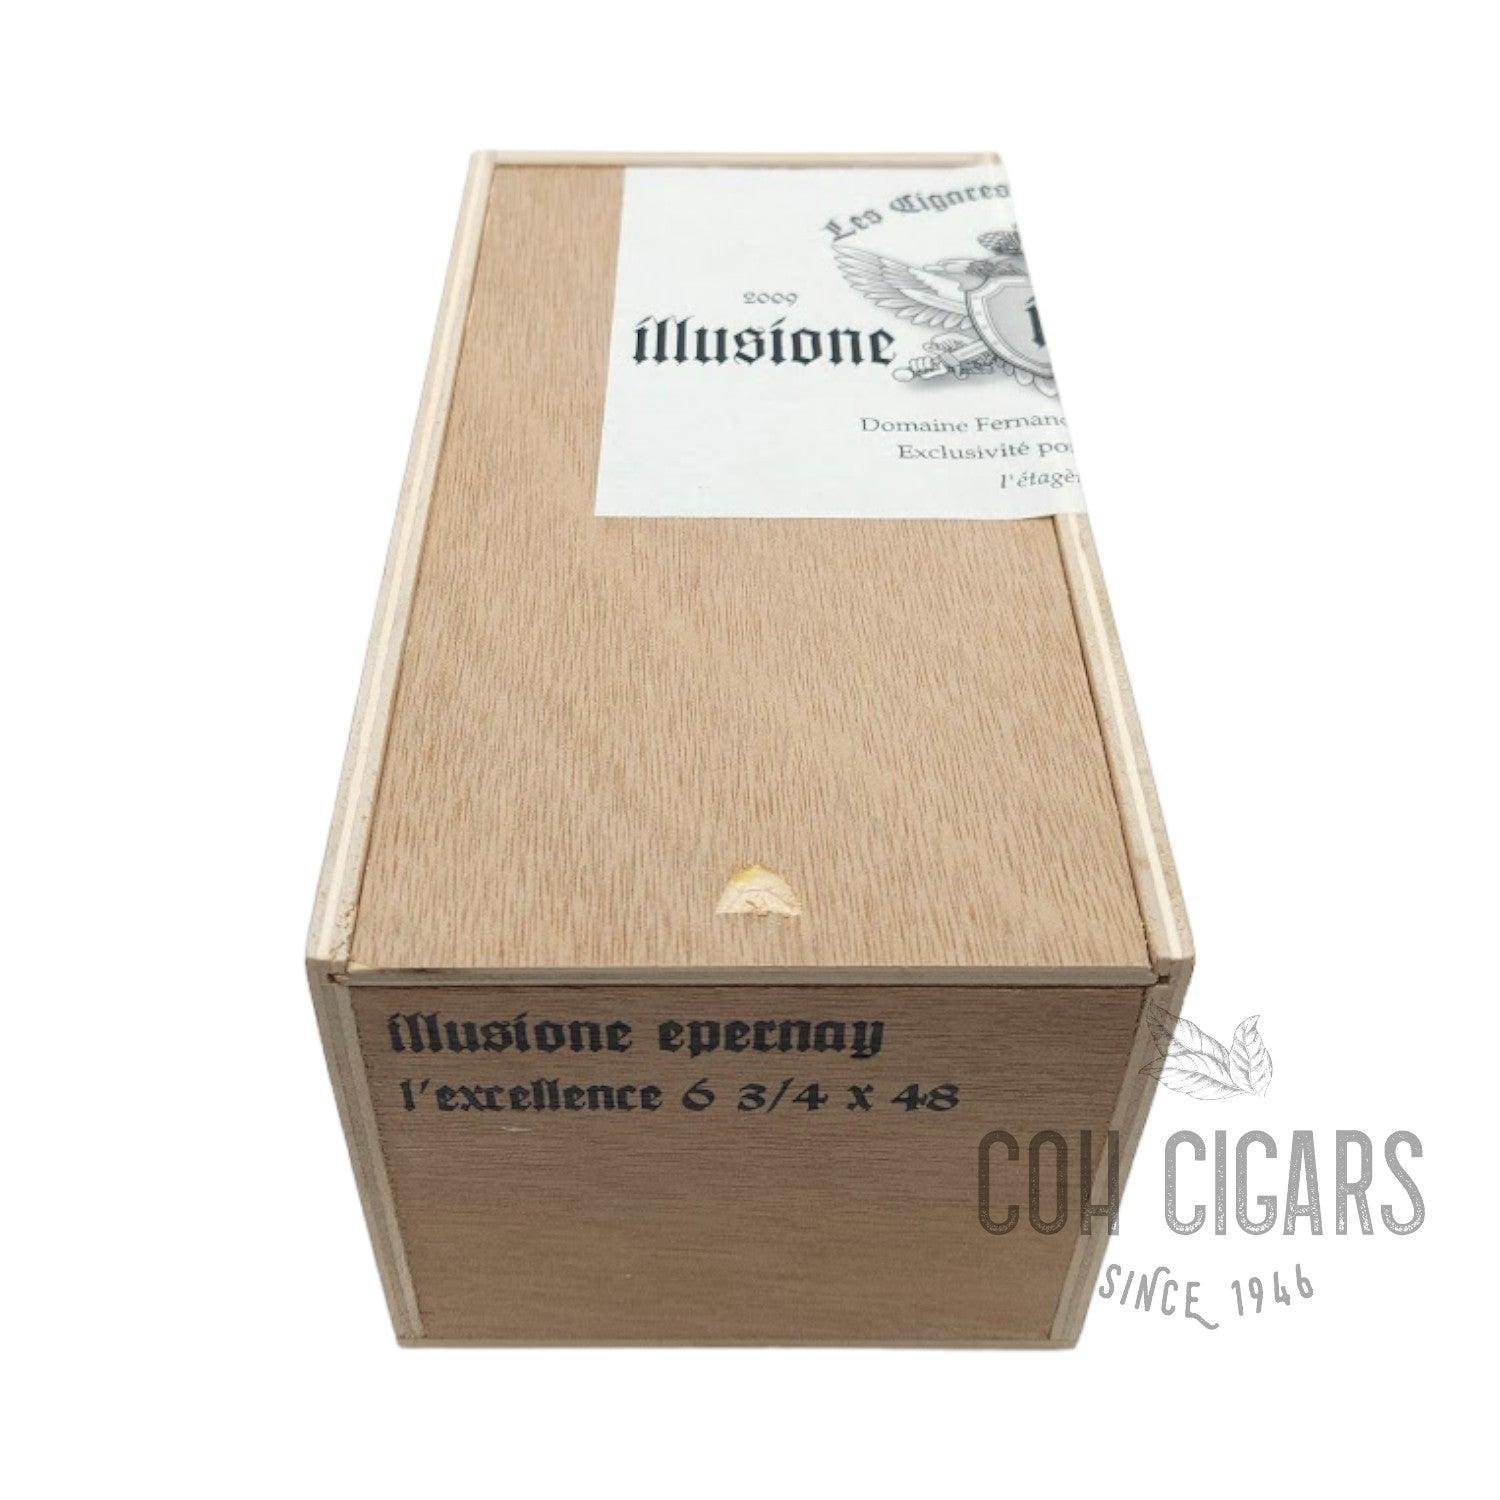 illusione Cigar | Epernay L'Excellence | Box 25 - hk.cohcigars